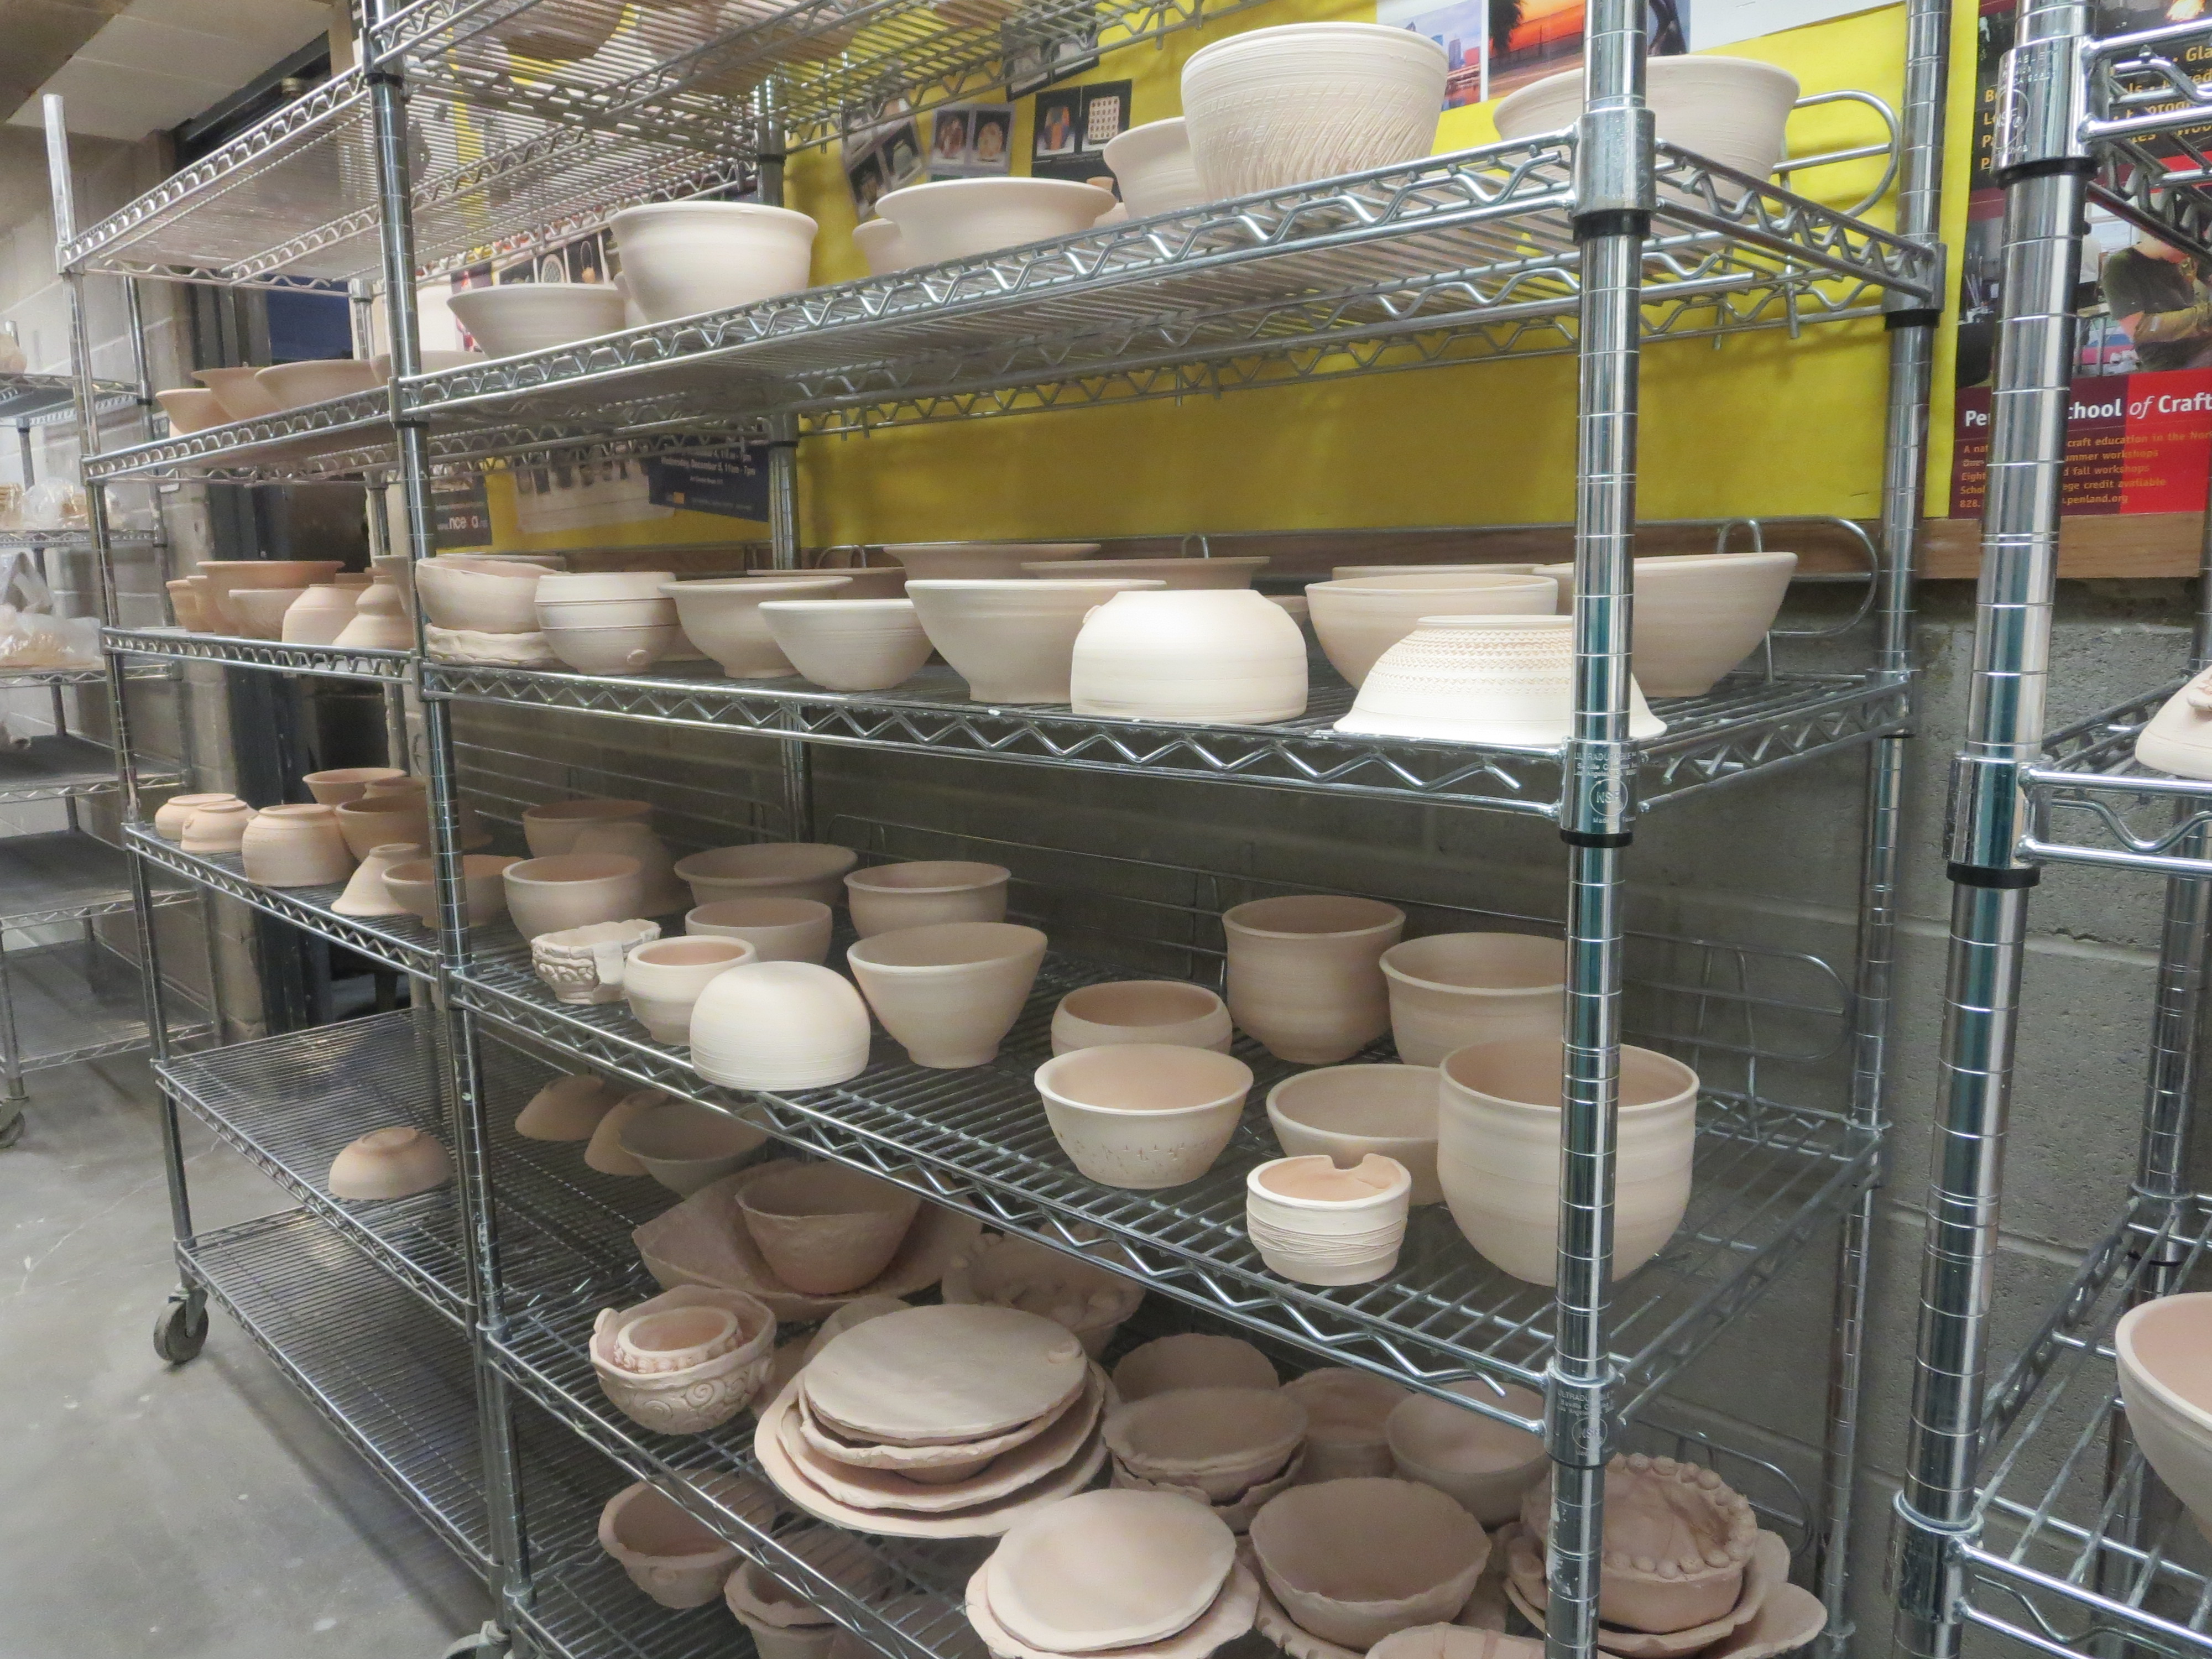 Ceramic students donate to hunger relief